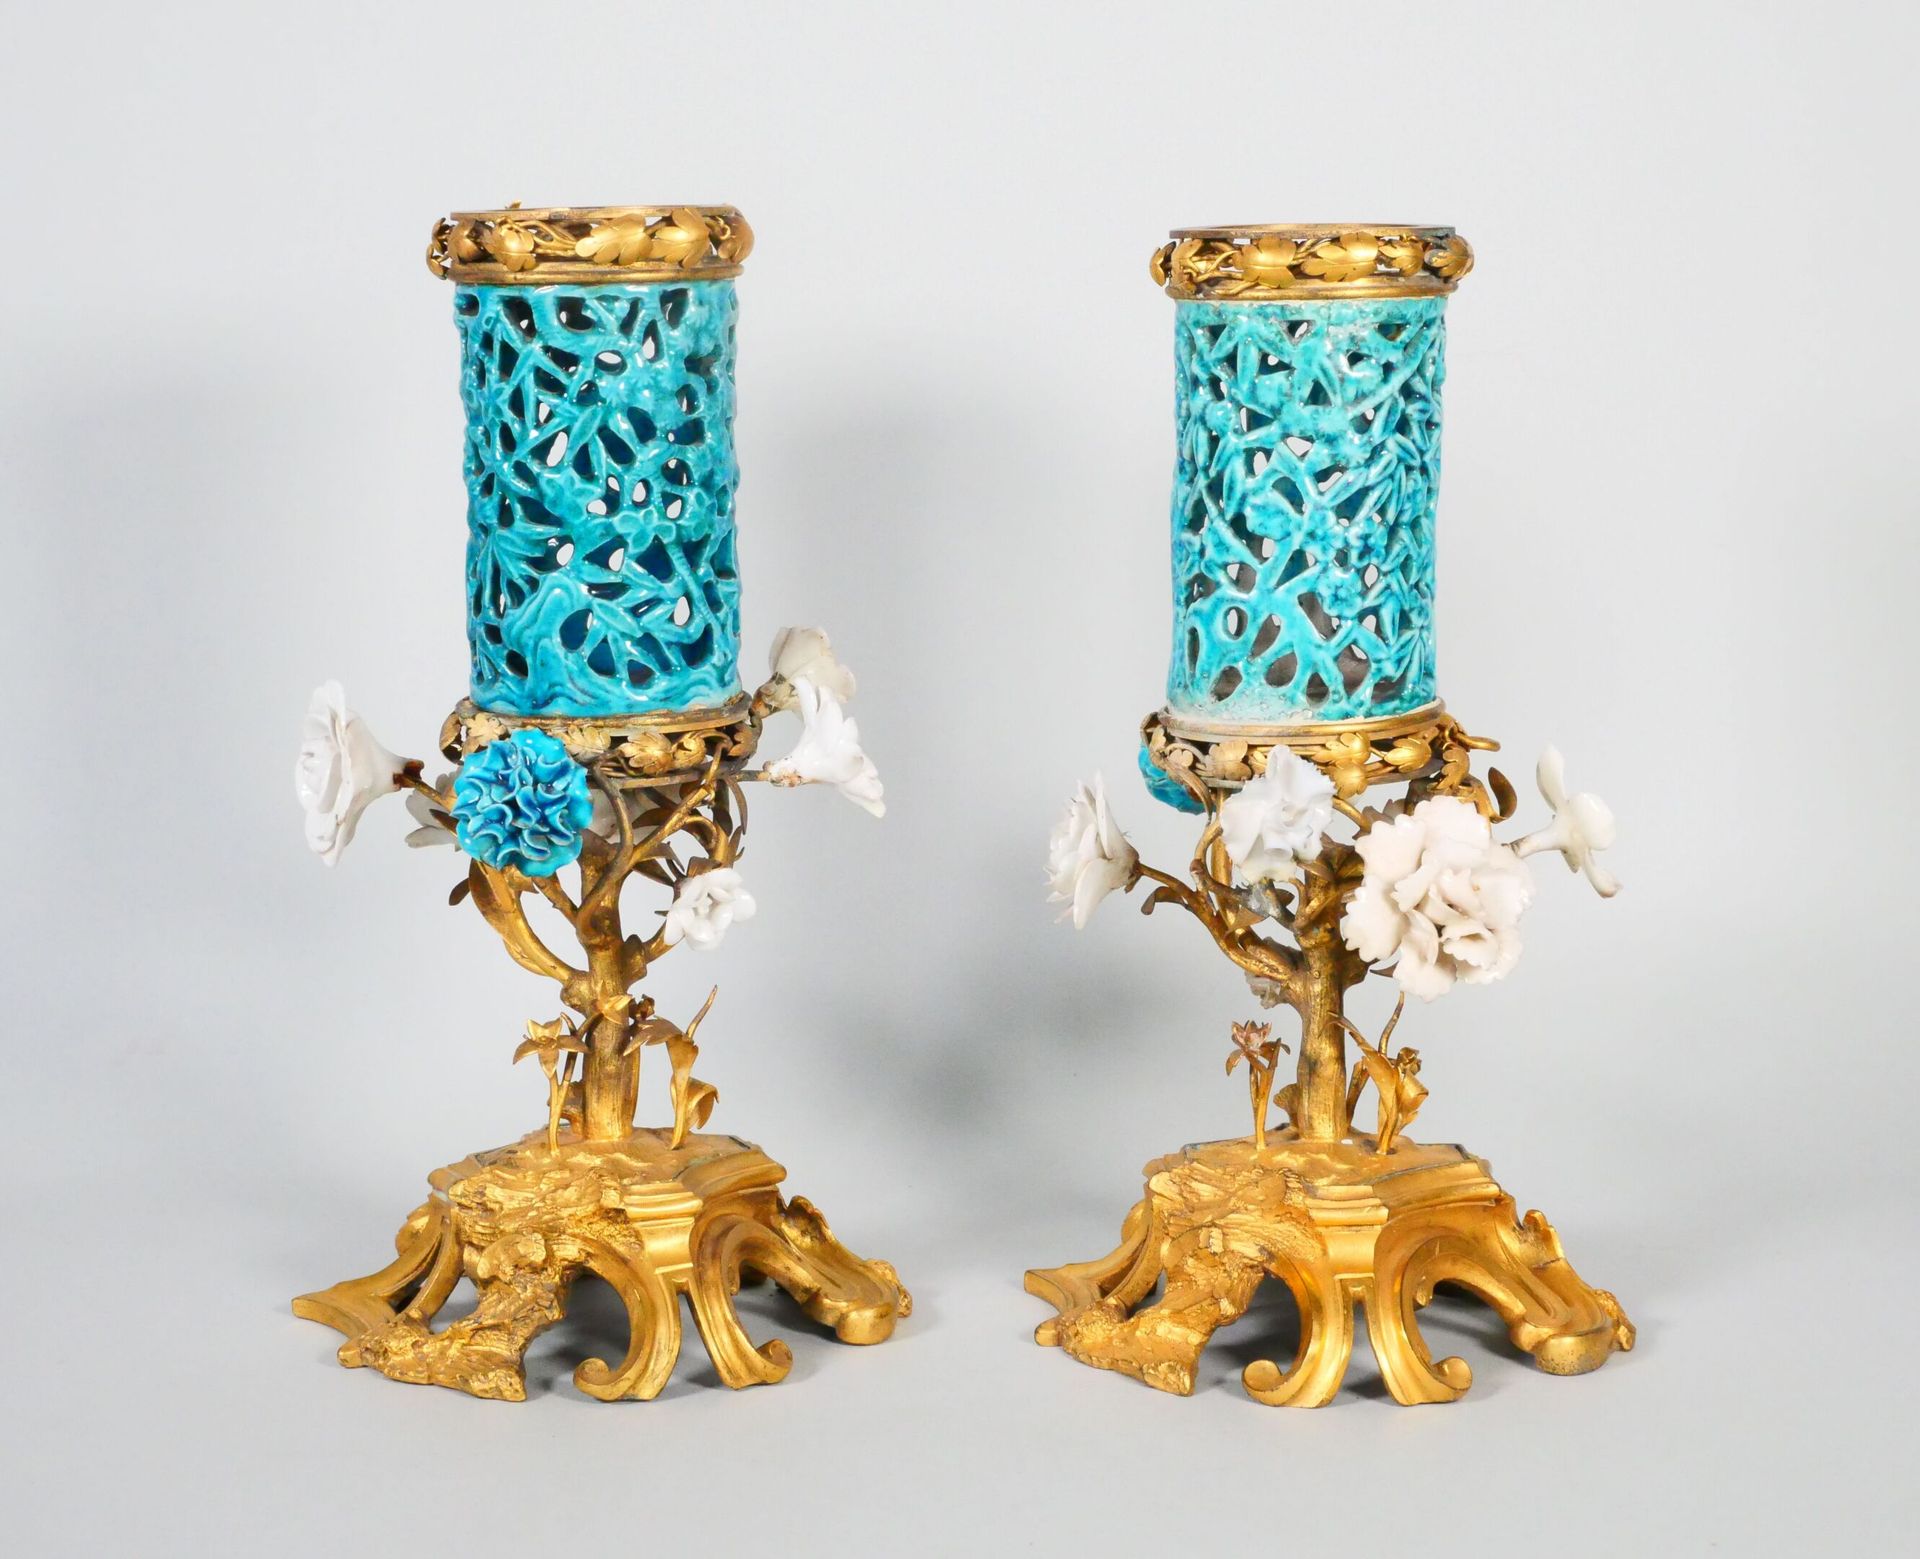 Null A pair of chased ormolu, blue-turquoise porcelain and enameled porcelain po&hellip;